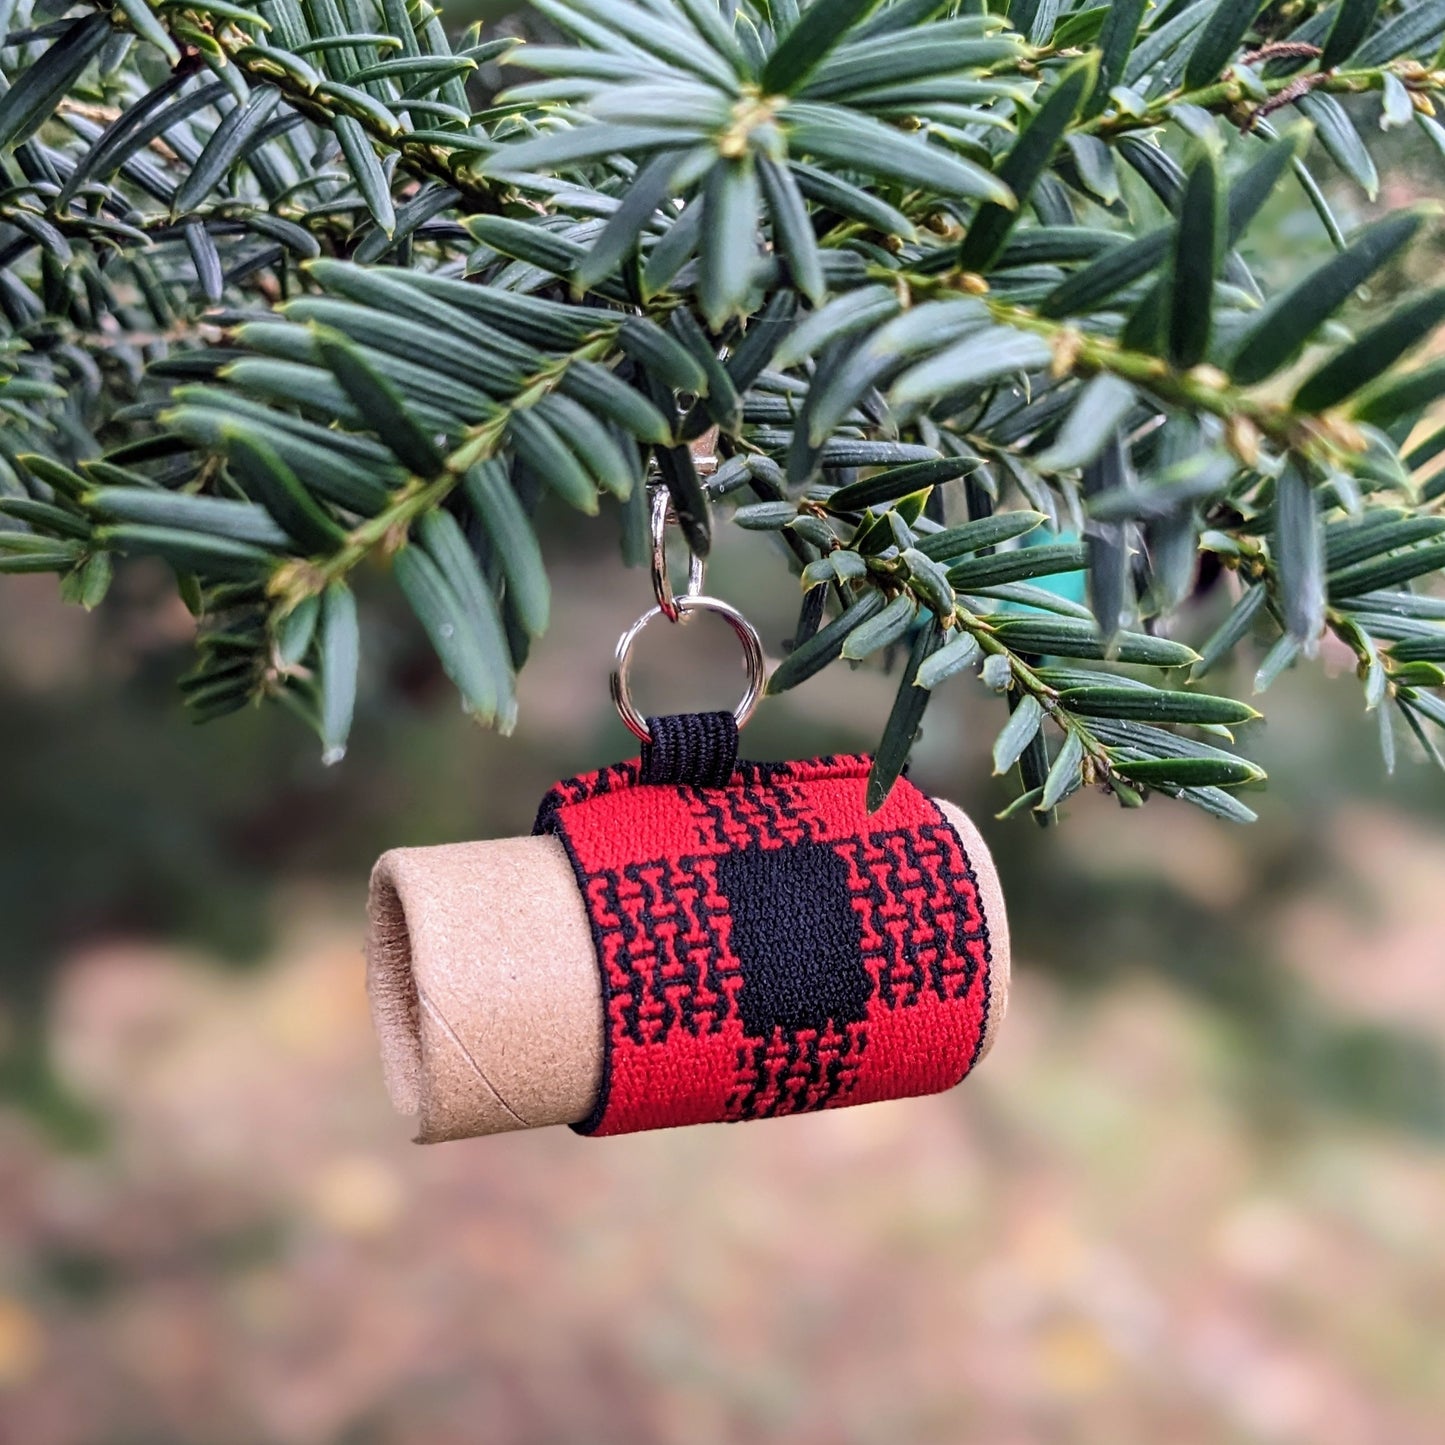 Handmade Lip Balm Holder - Elastic Chapstick Holder with Keychain Clip. Pair with our Zero Waste Plastic Free Lip Chap!